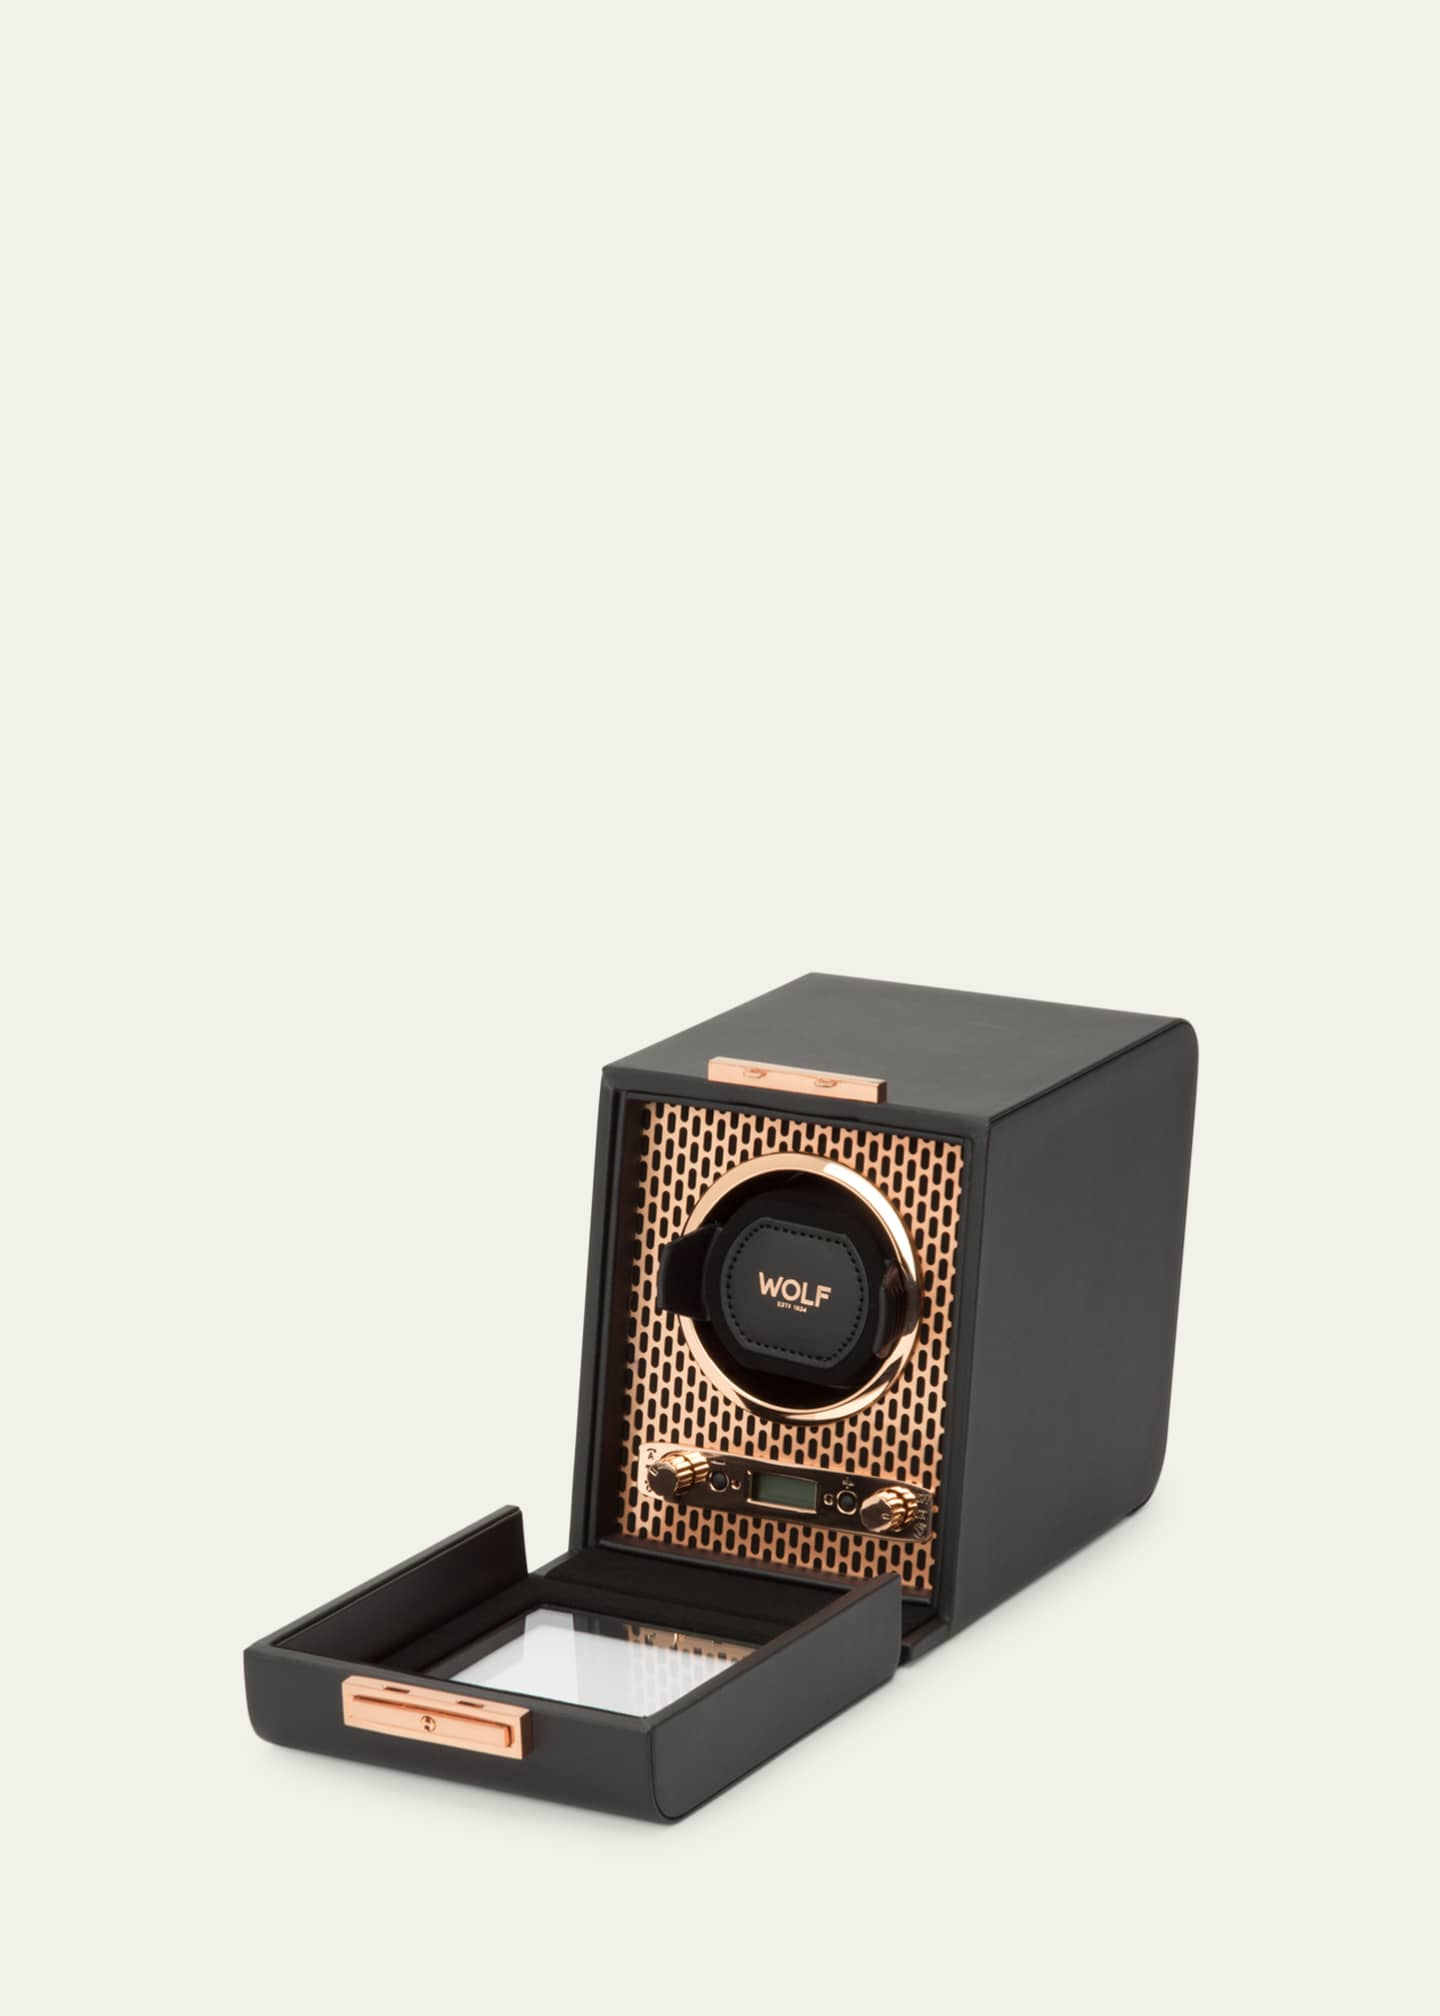 WOLF Axis Single Watch Winder Image 2 of 3